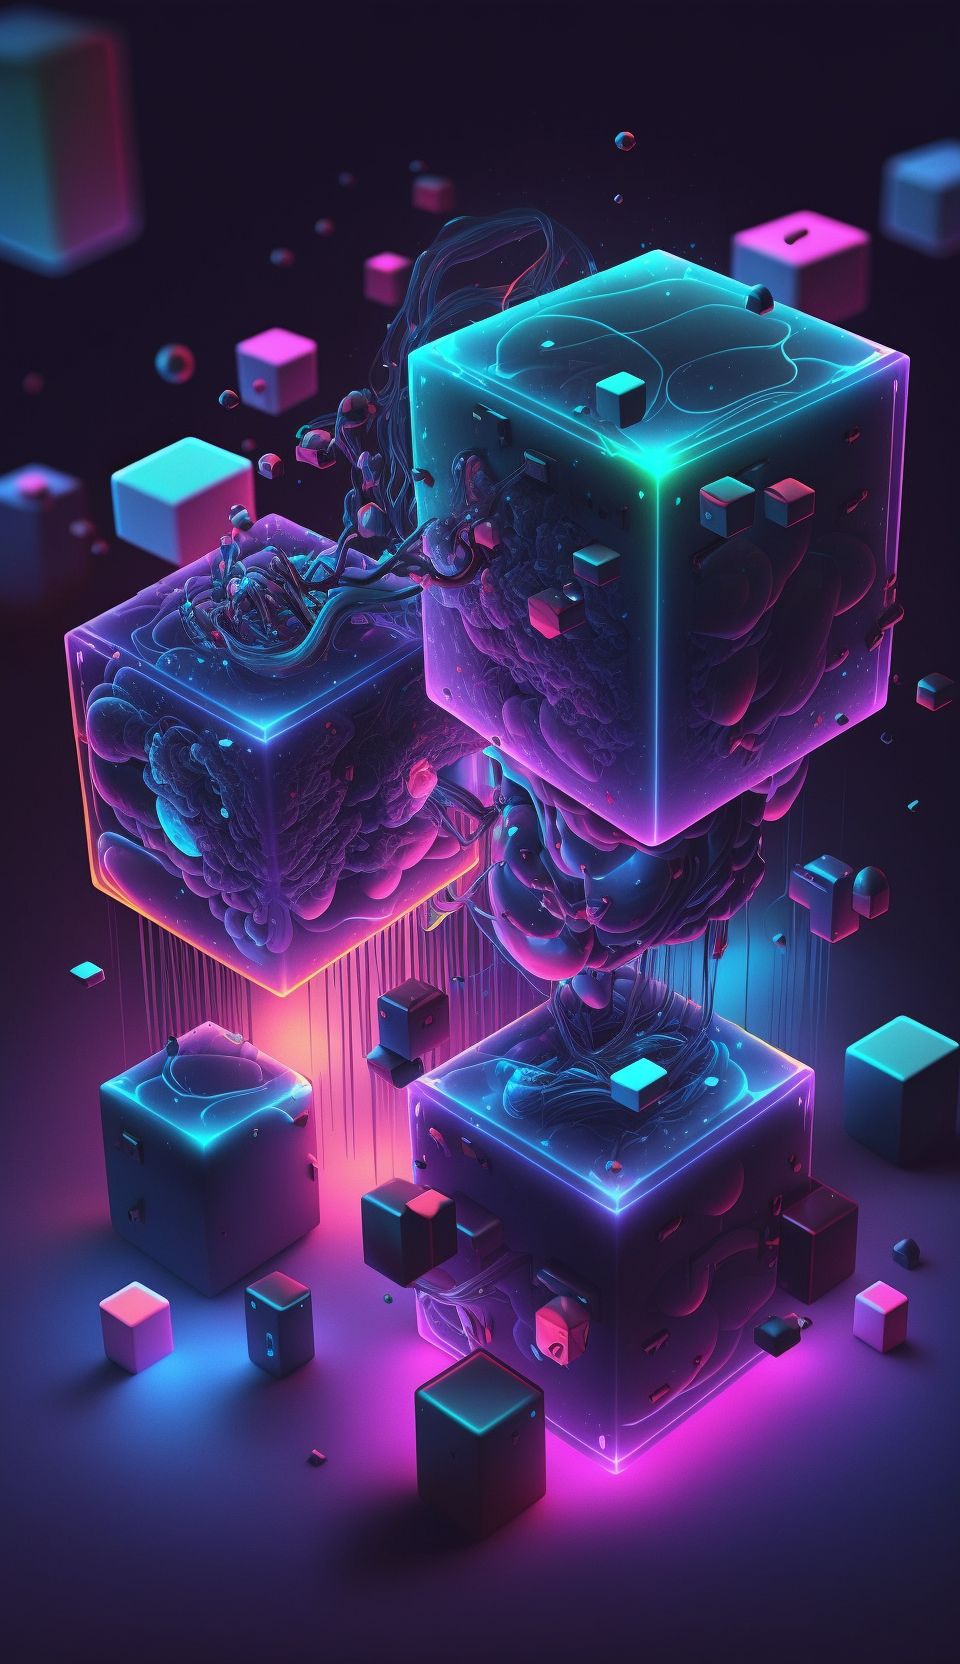 soupcan13_floating_hyper_detailed_mechanical_cubes_surrounded_b_469675d9-52c7-4b36-9200-14ee3454412a.png